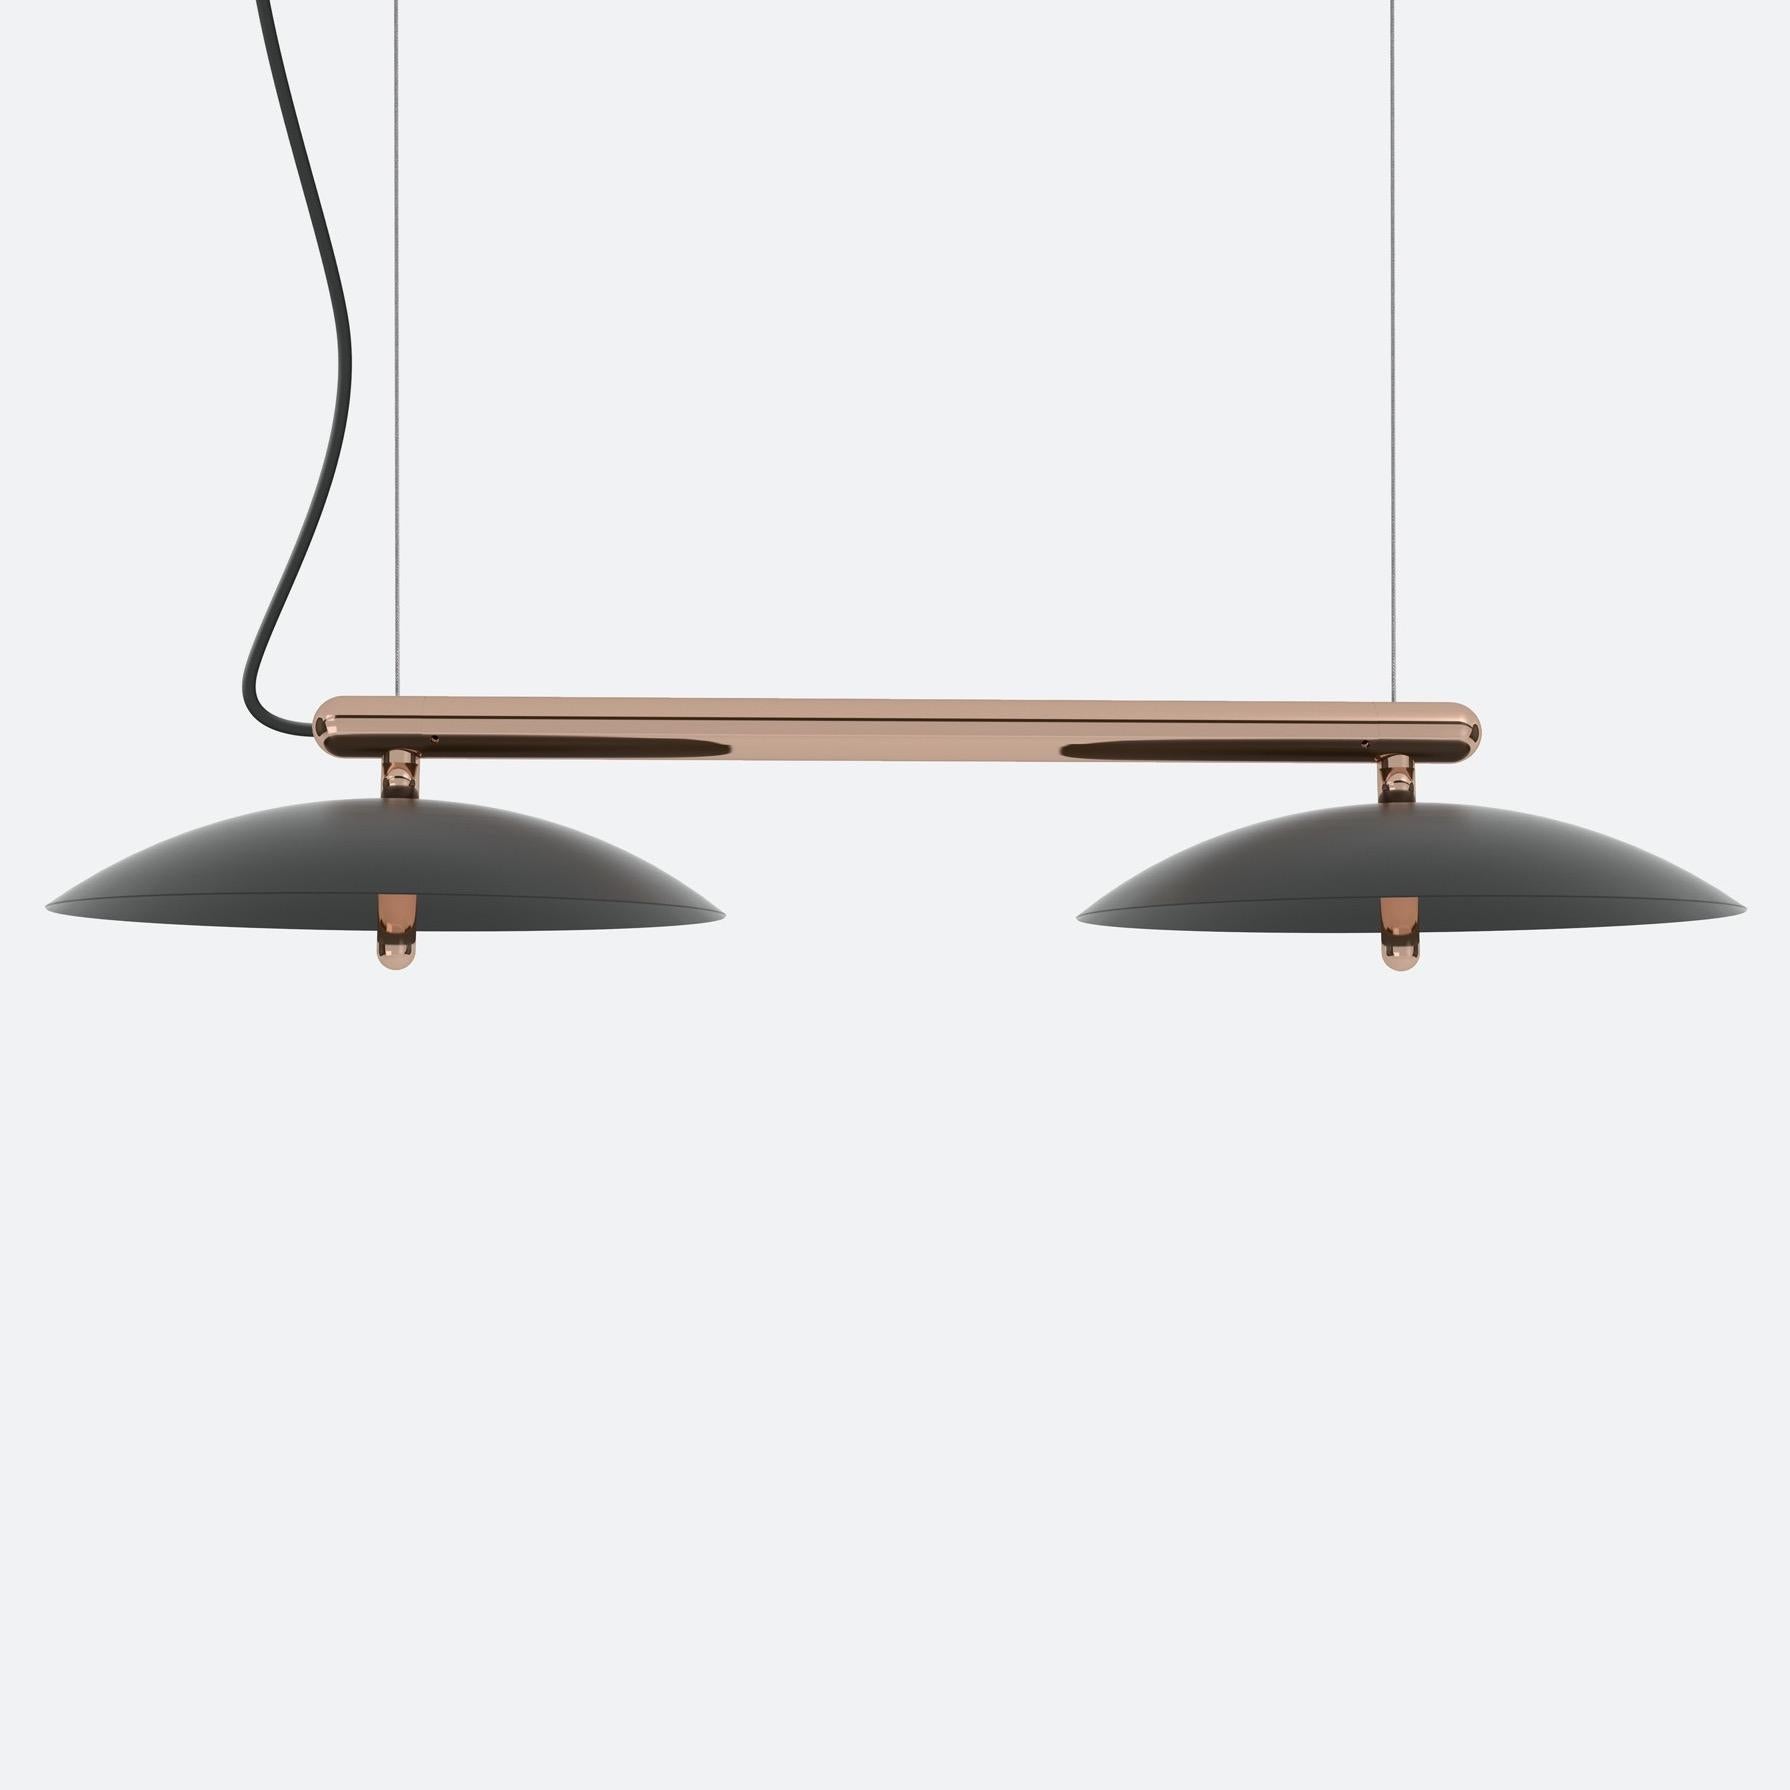 Price is for a signal linear pendant with black shades and copper accents. This piece is customizable so we can also make the finishes per order to your spec. 

Lamping: G8 LED Bulbs (included)
Canopy: Black, 5in Diameter, .25in height
4x G8 LED